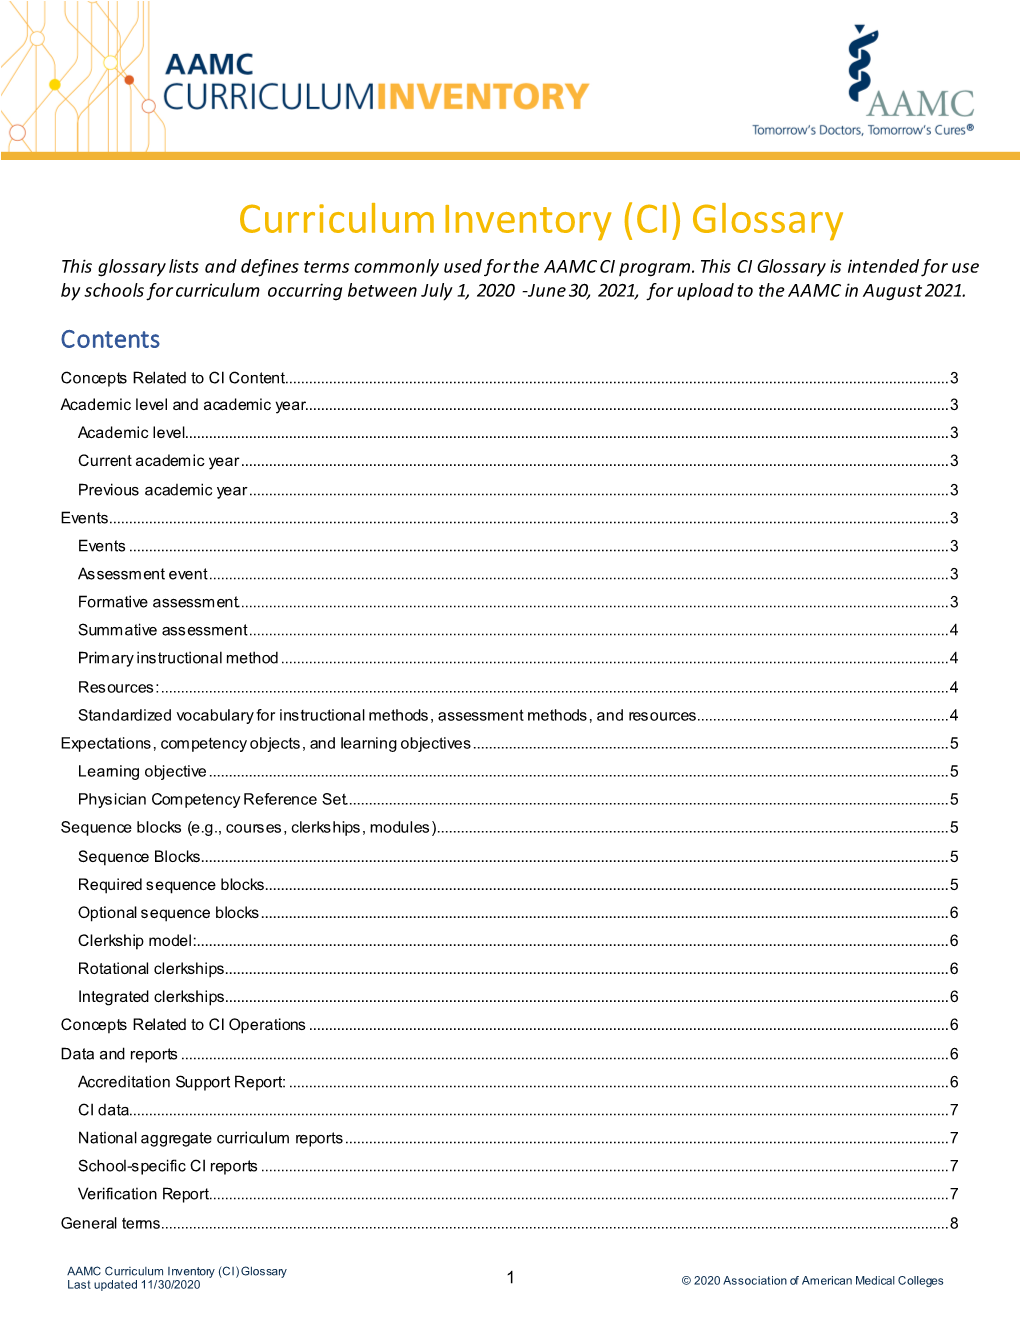 Curriculum Inventory (CI) Glossary Last Updated 11/30/2020 1 © 2020 Association of American Medical Colleges